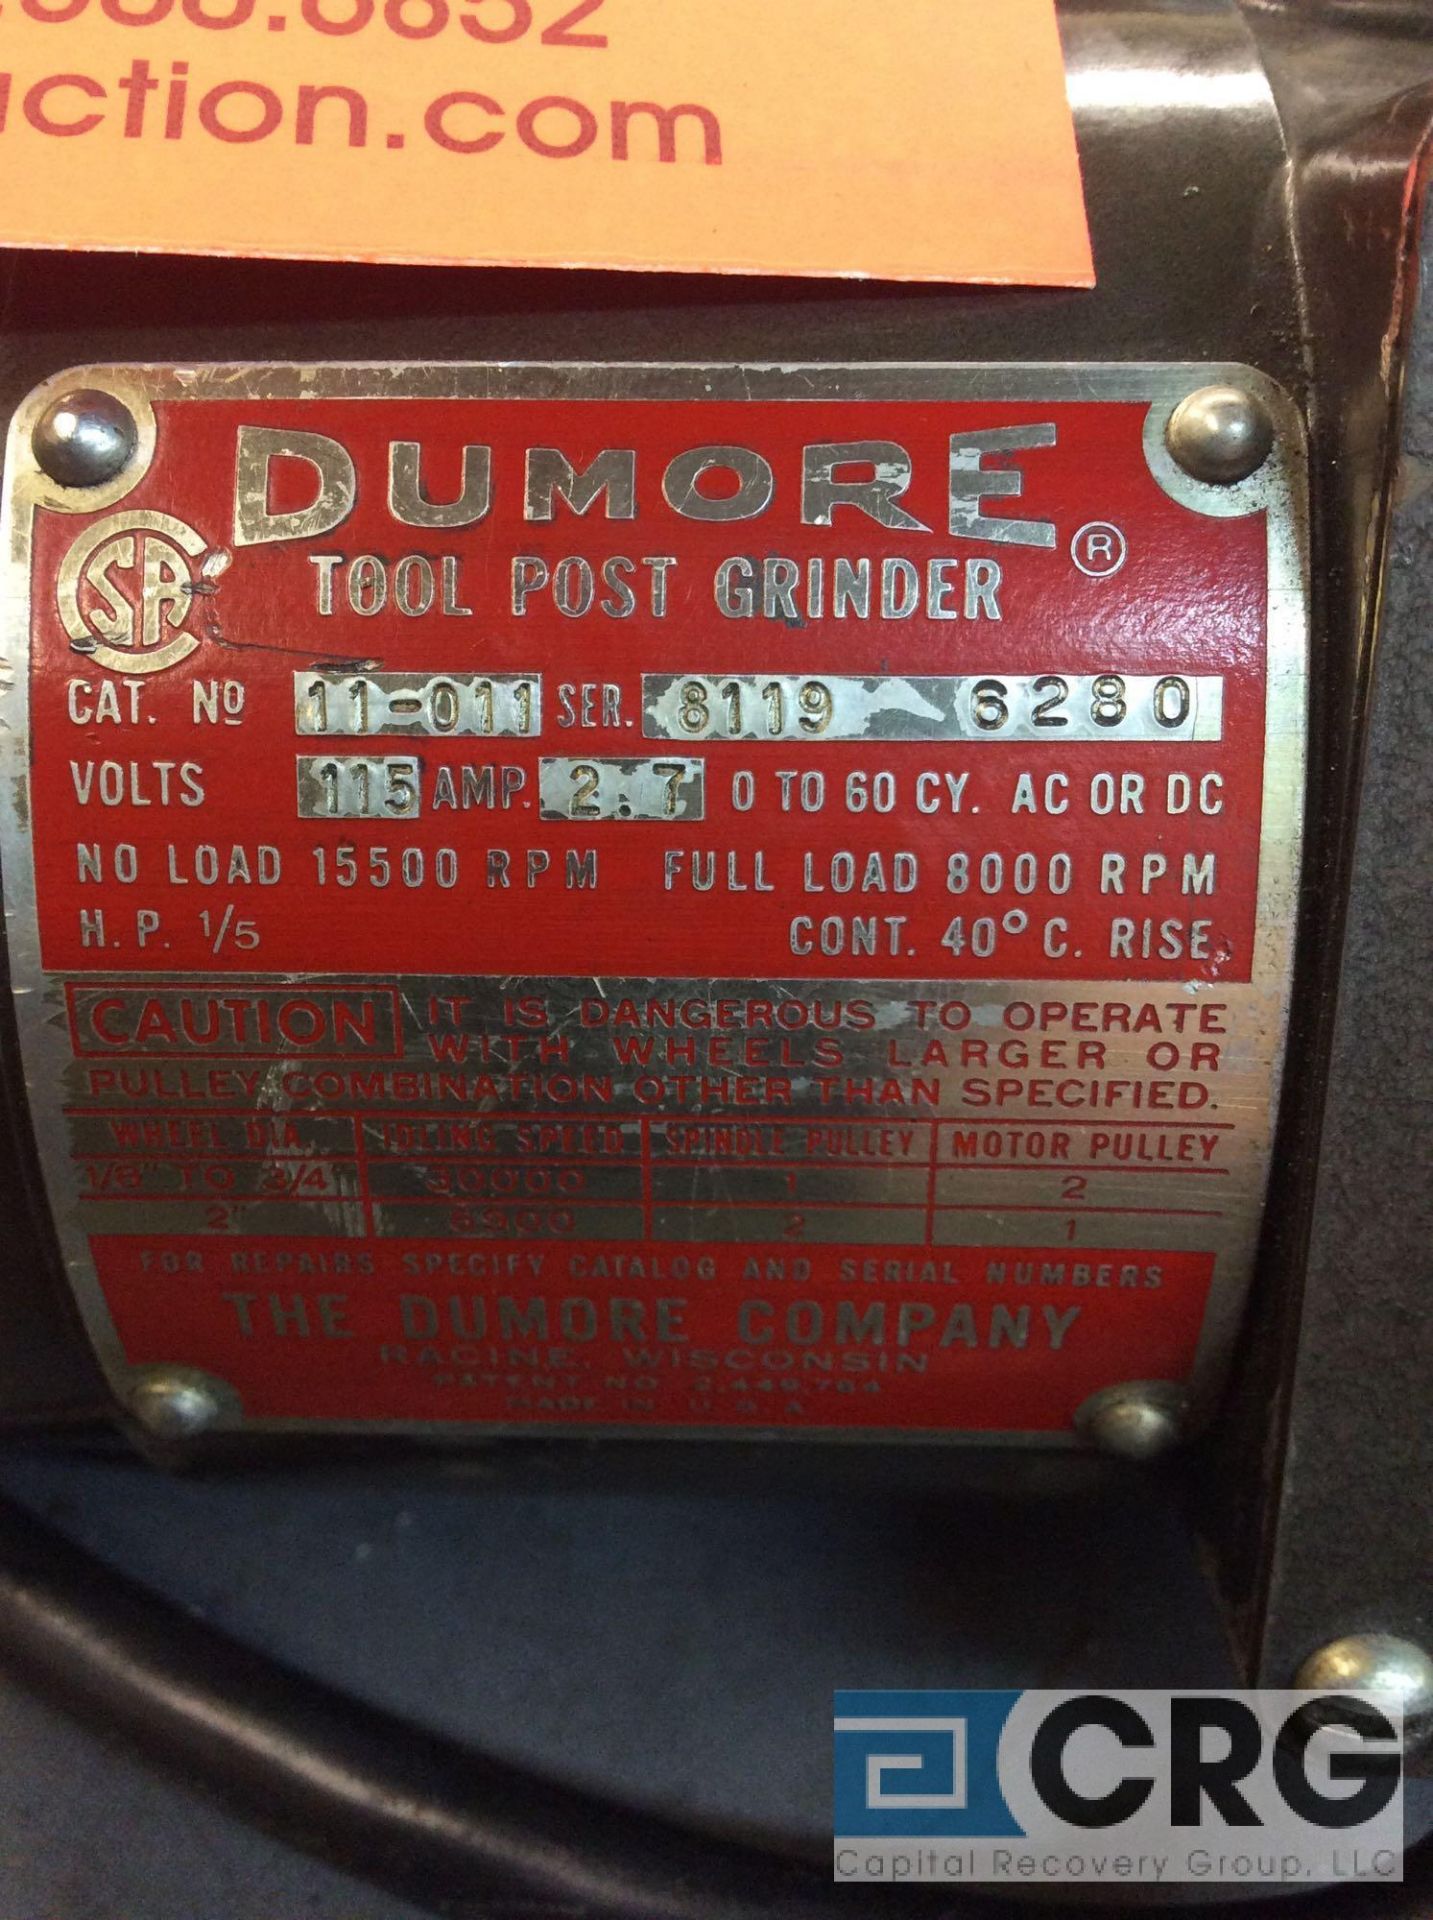 Dumore tool post grinder, mn 11-011, 1/5 HP, 1 phase with steel case (LOCATED IN TOOL ROOM MACHINE - Image 2 of 2